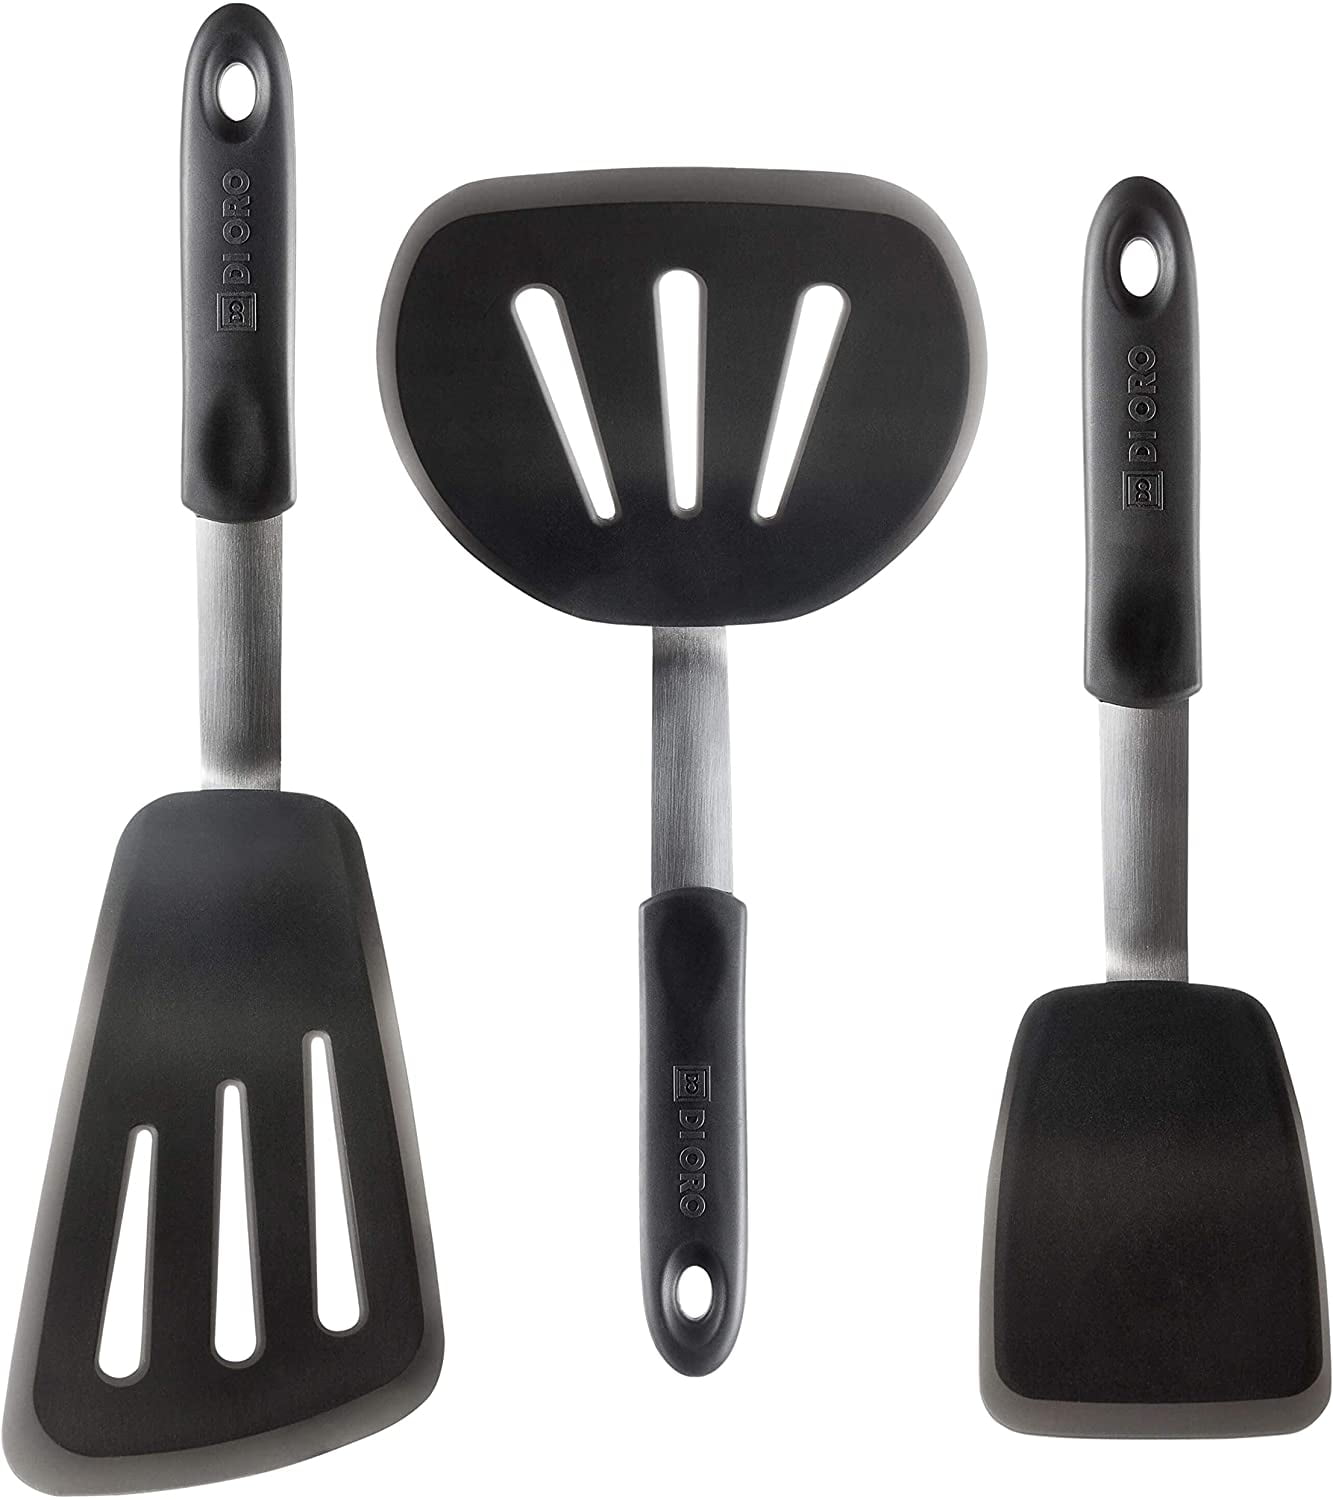 Chef'n 103-083-005 Spatula Price in India - Buy Chef'n 103-083-005 Spatula  online at